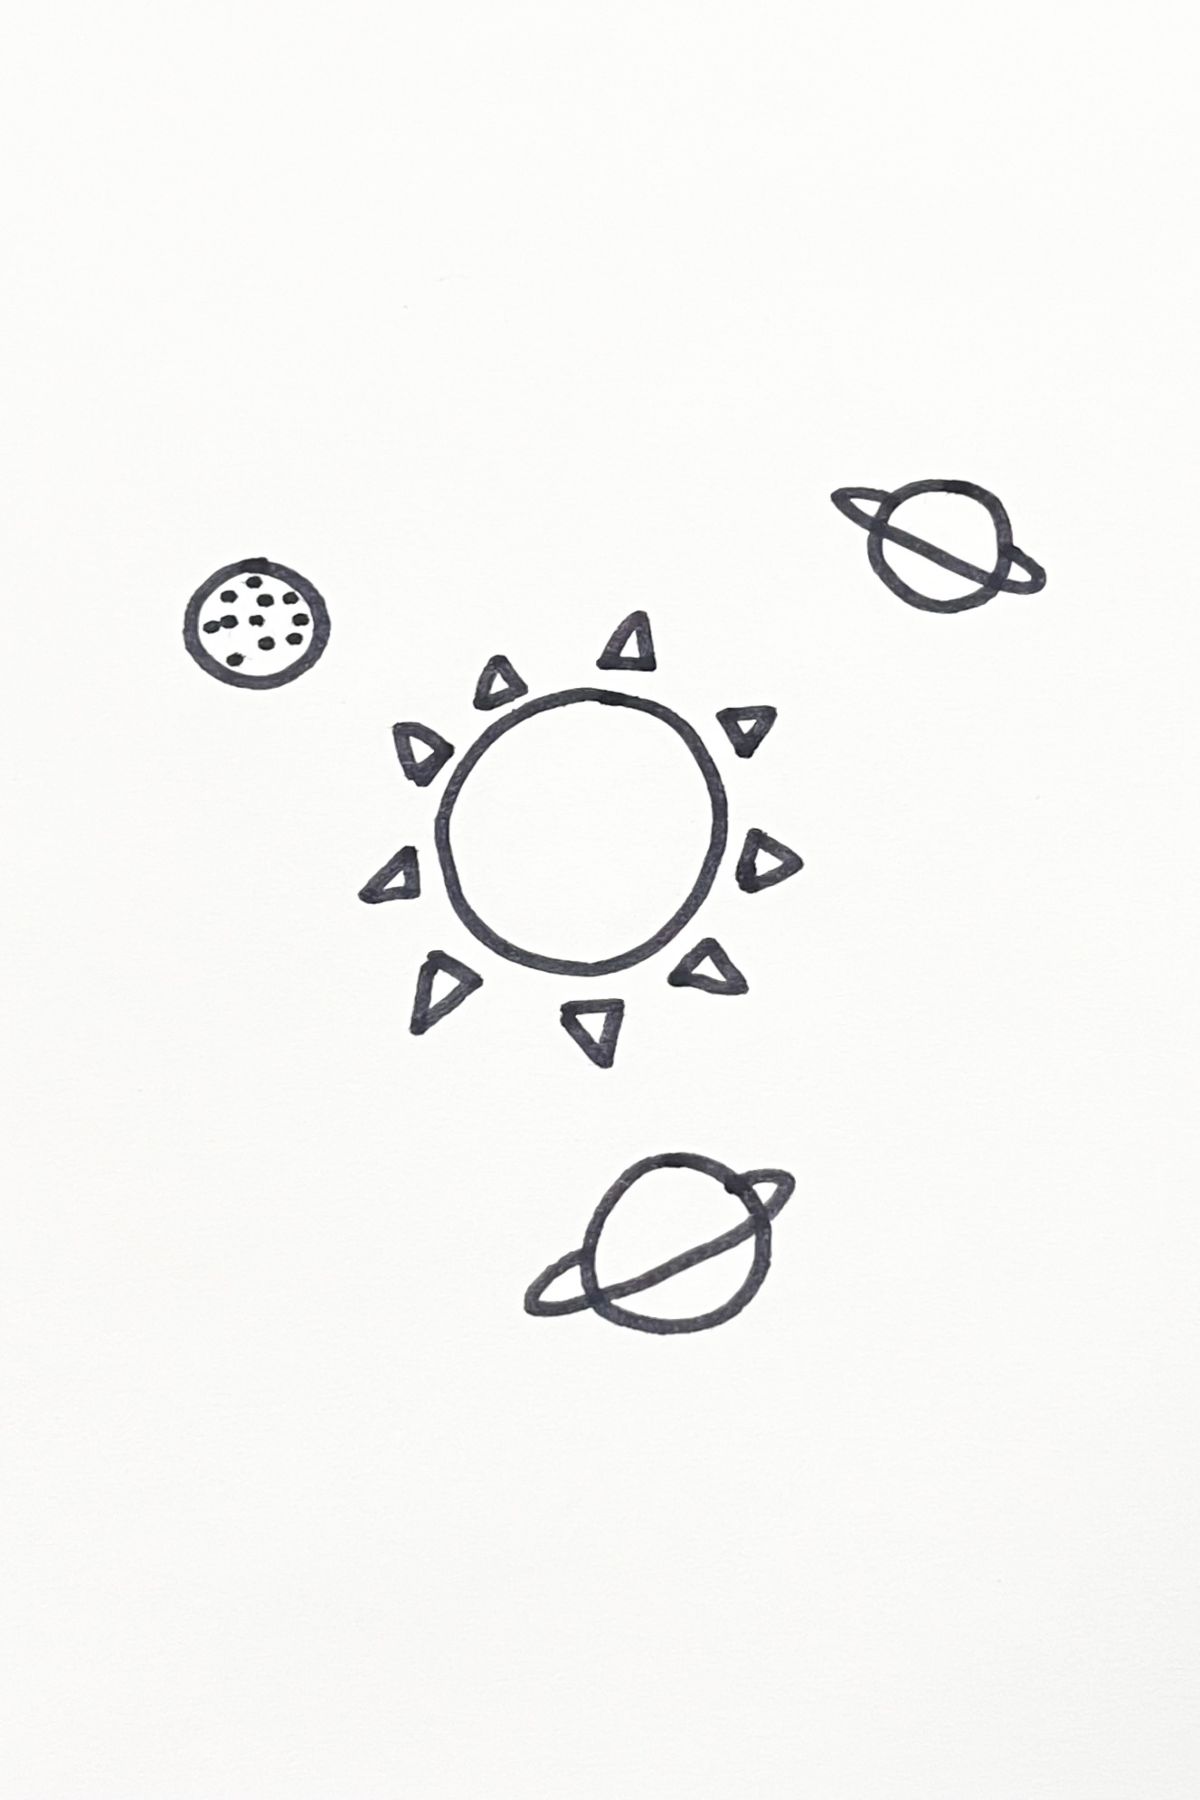 simple planets drawing idea